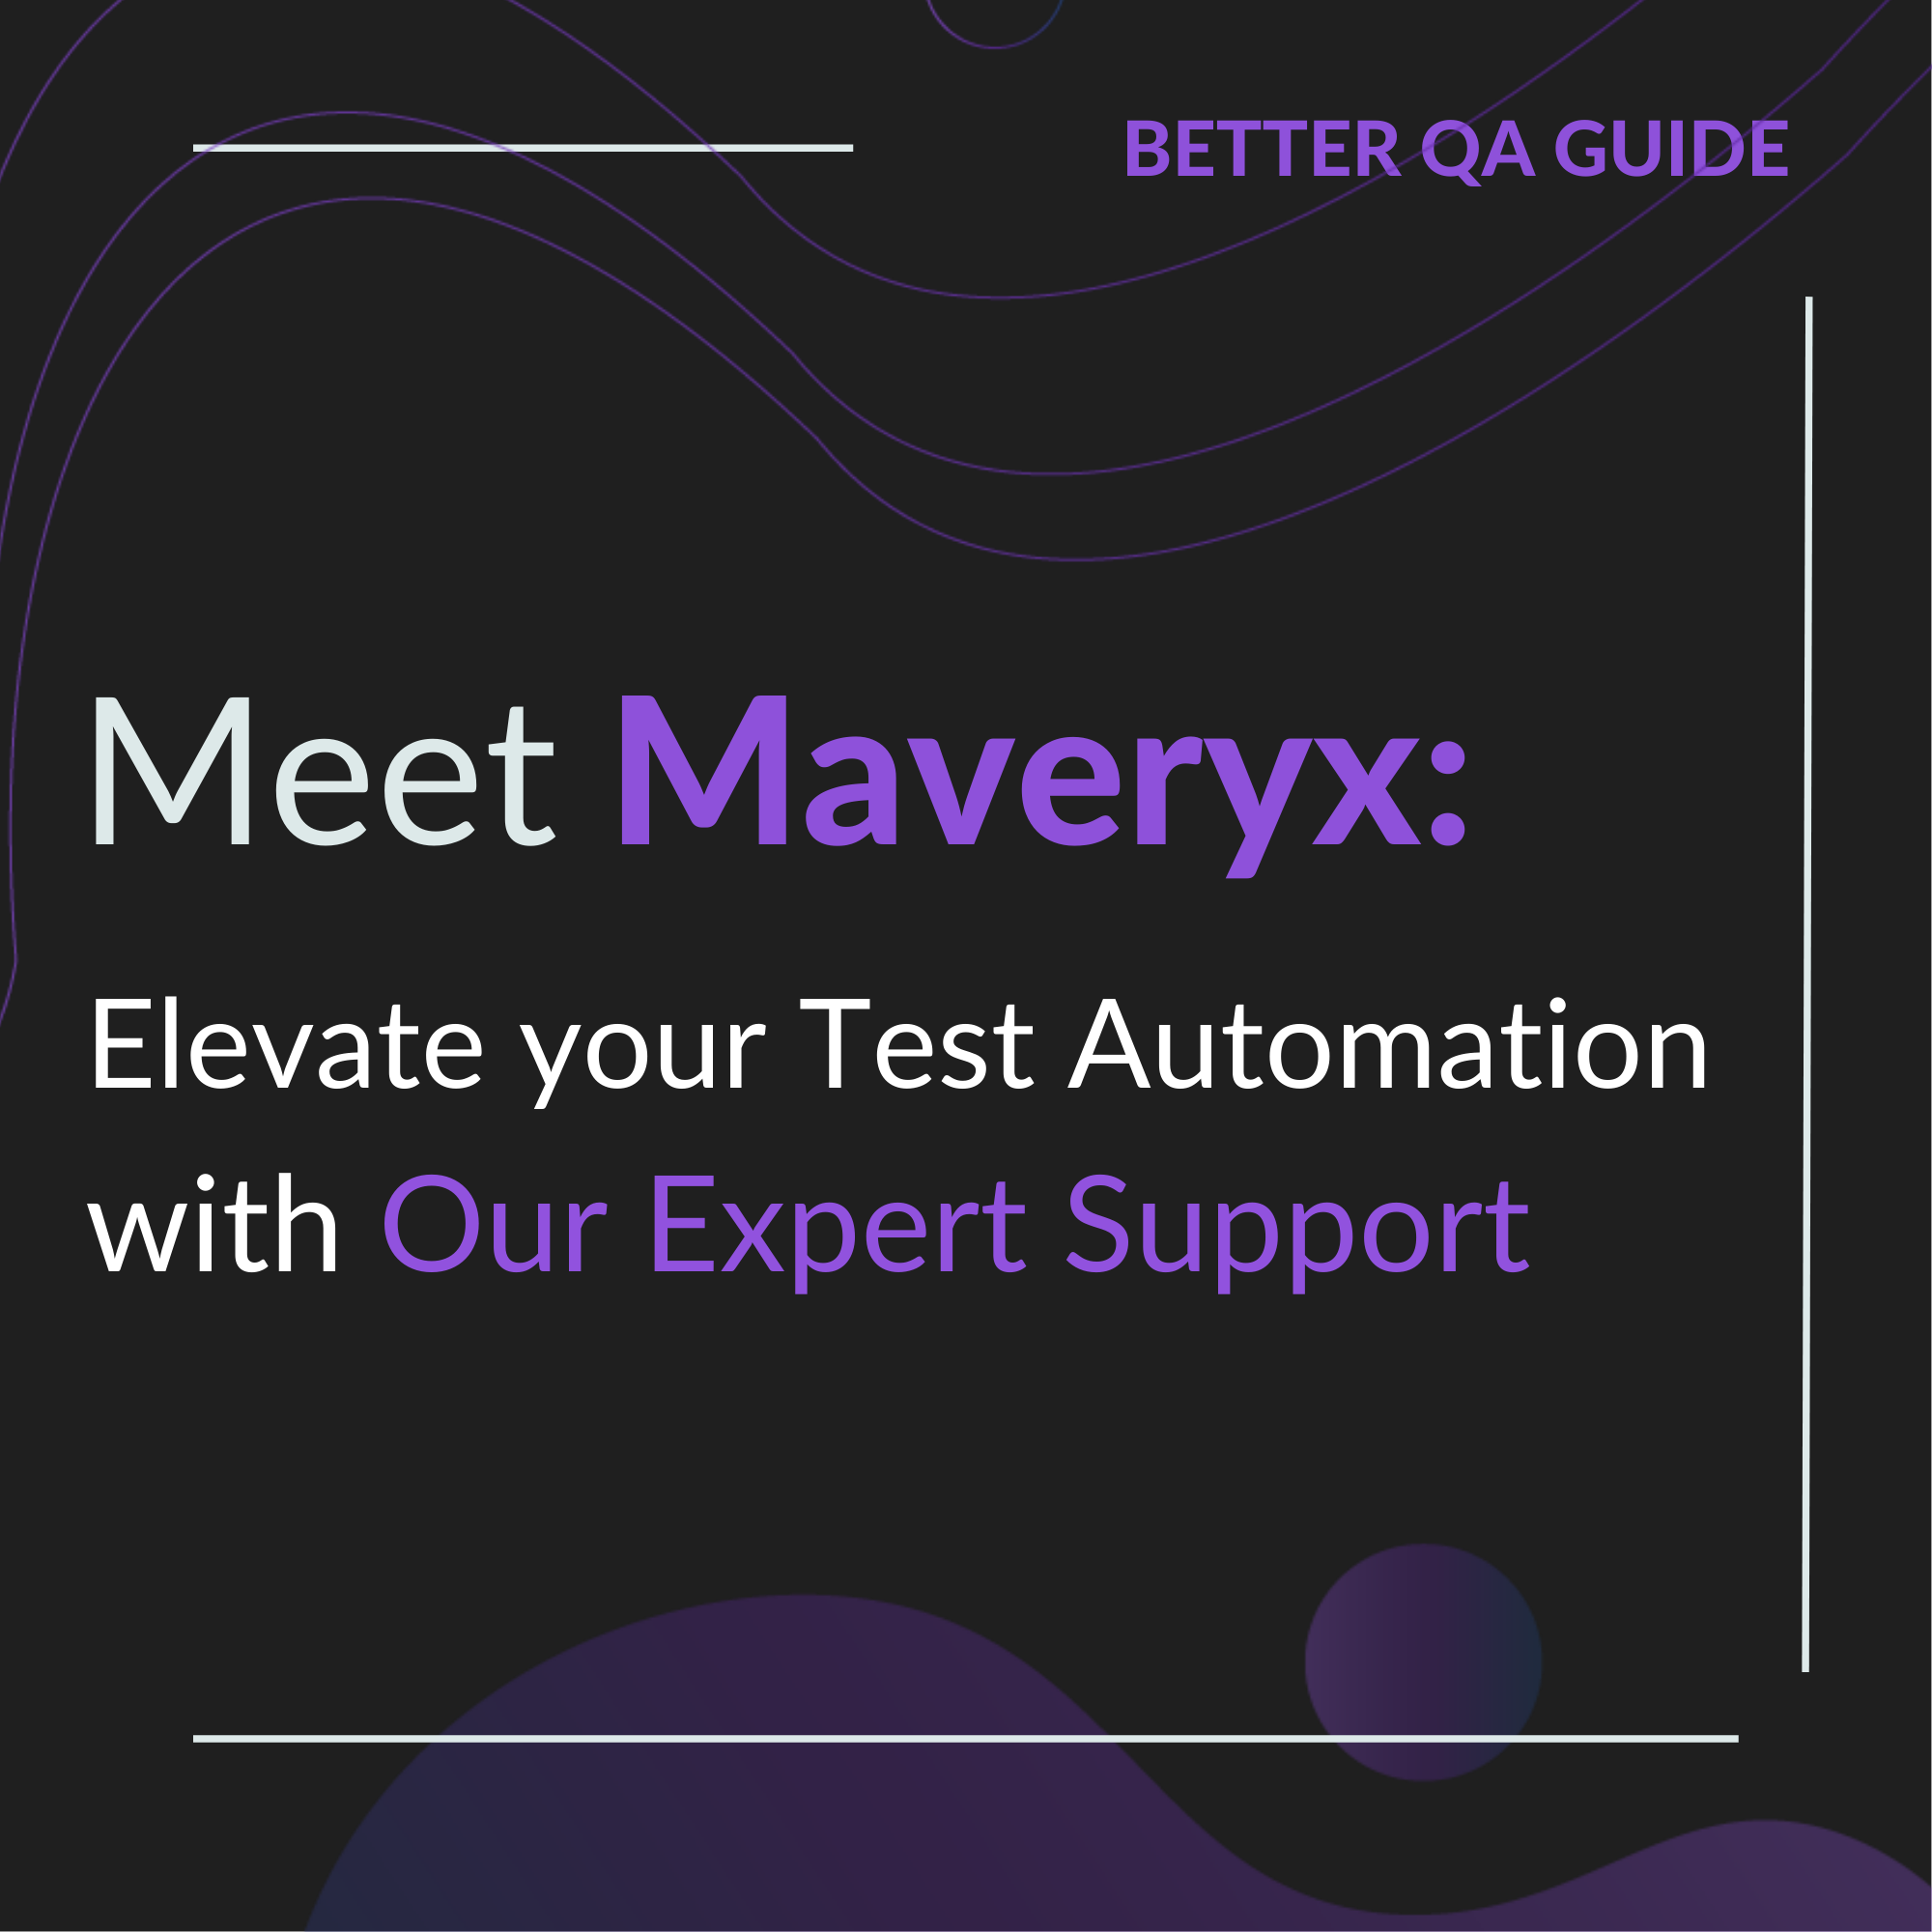 Meet Maveryx Elevate Your Test Automation with Our Expert Support